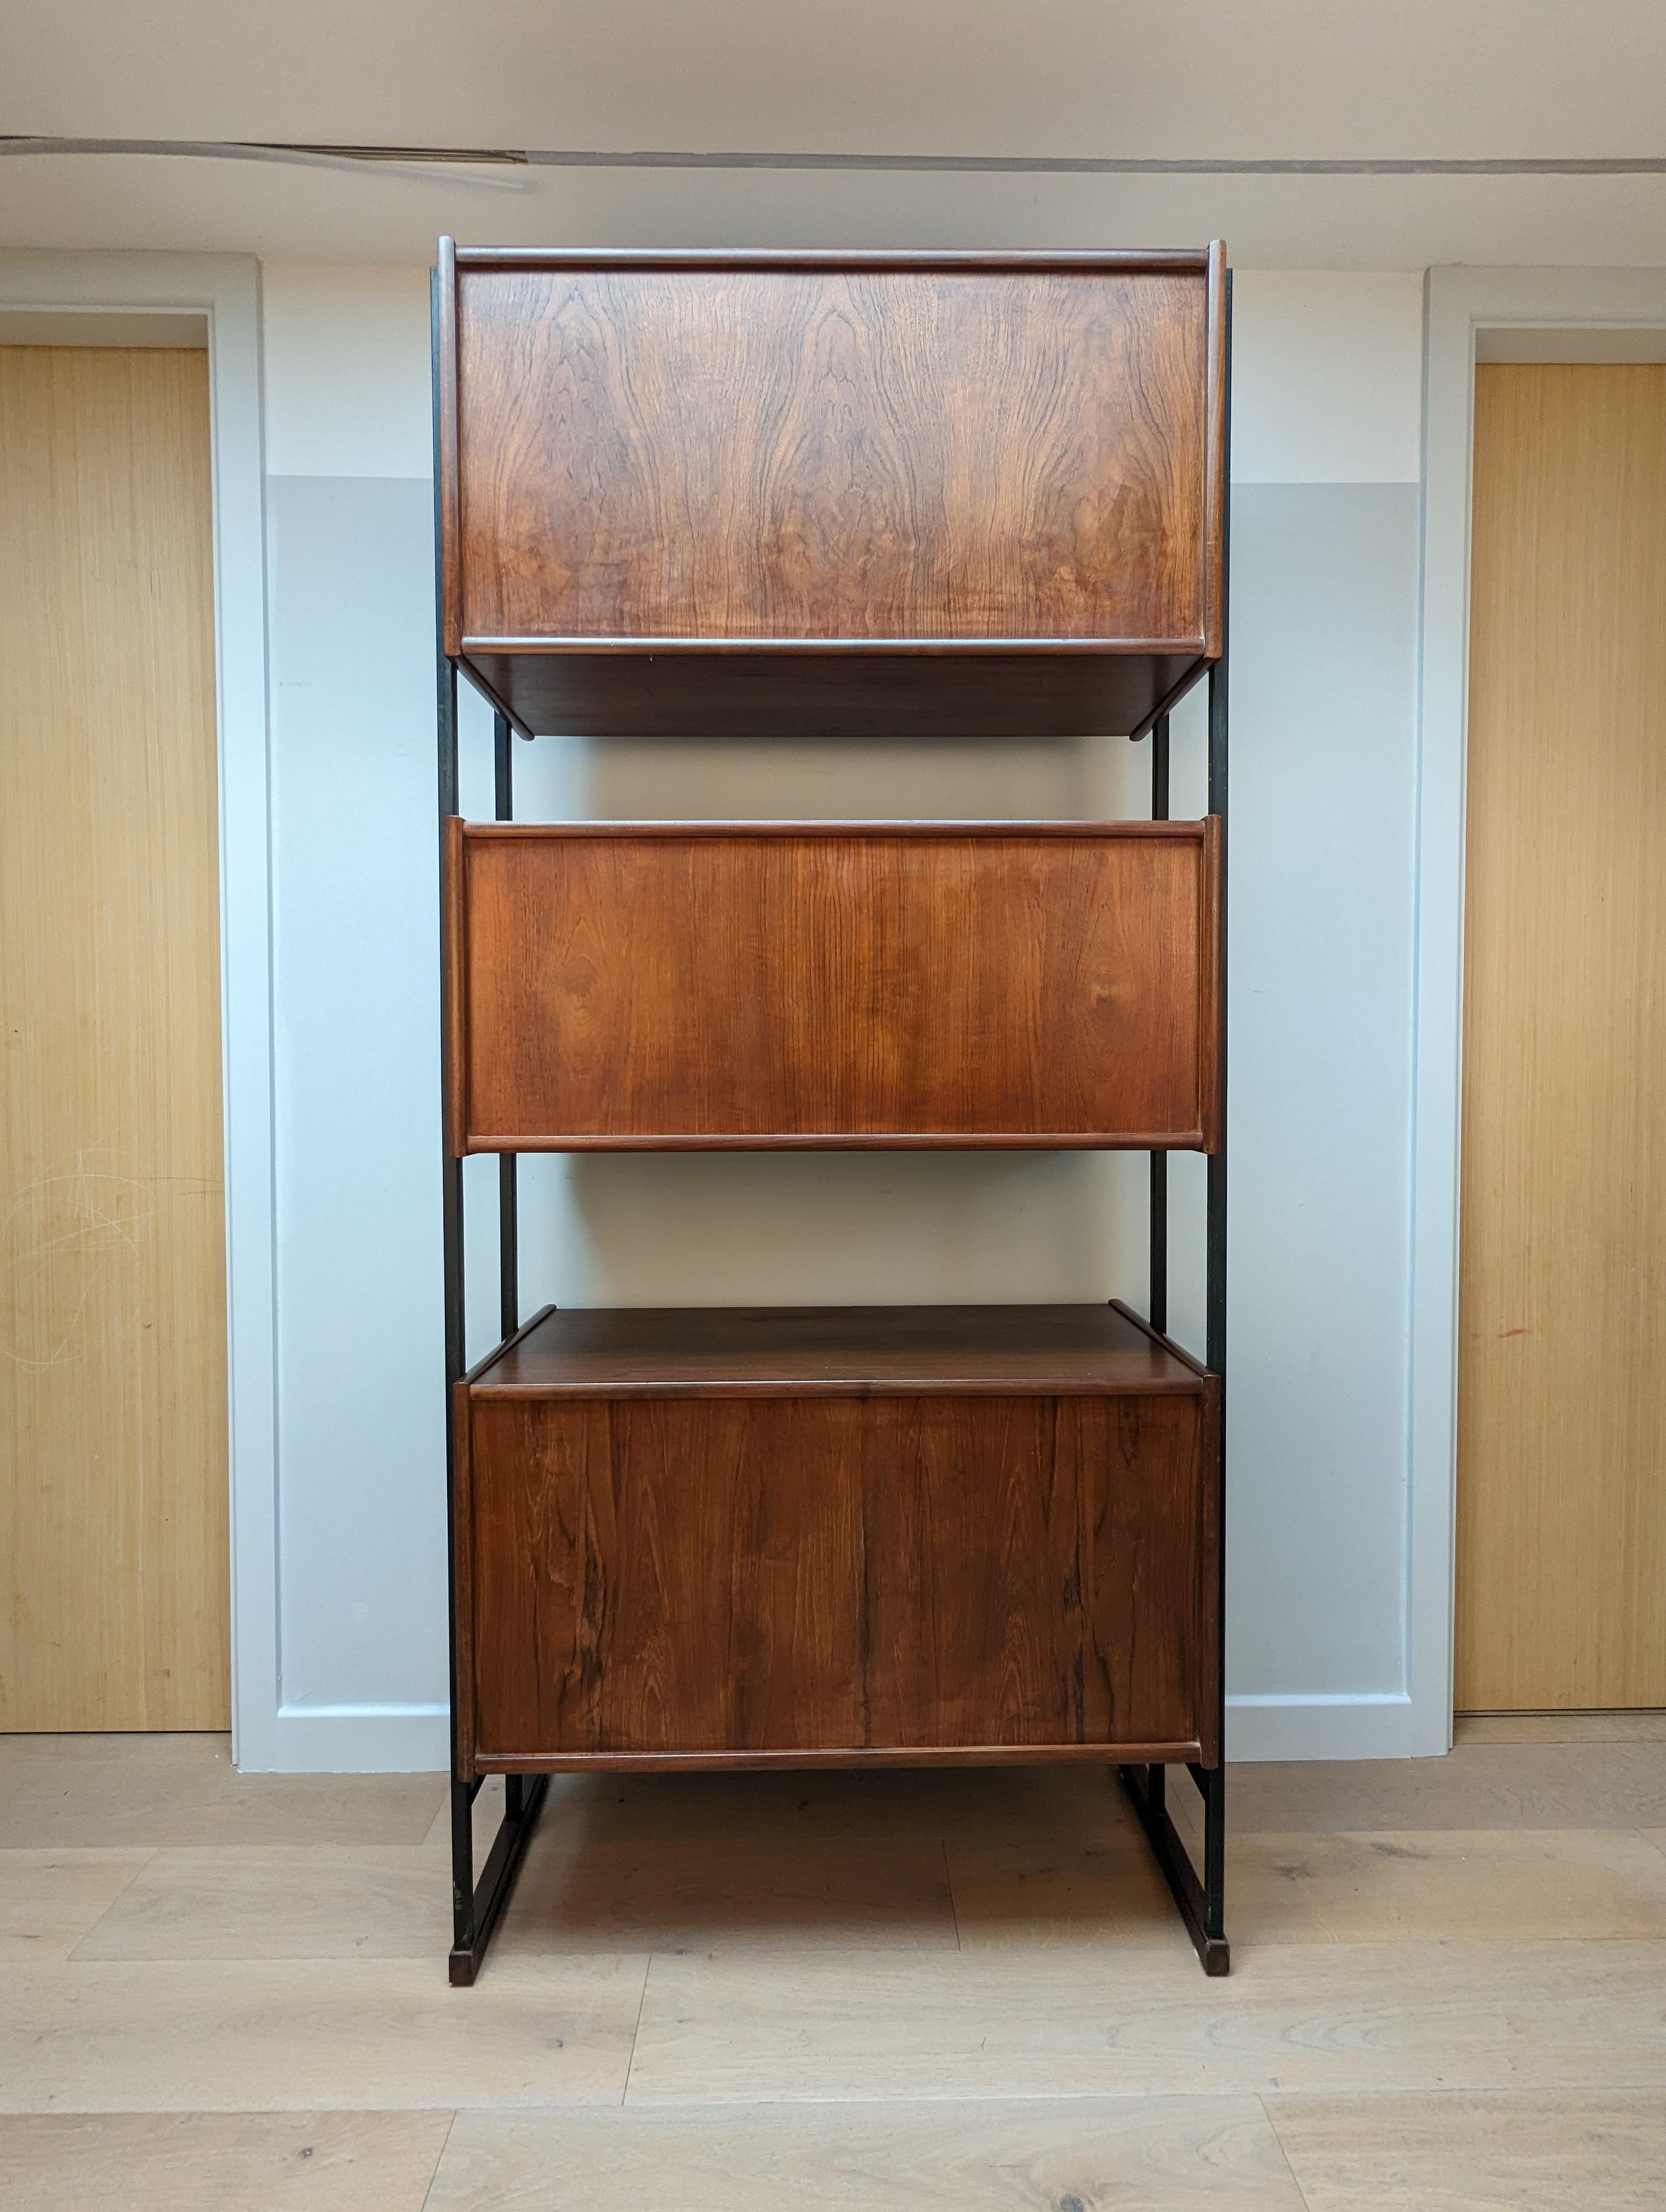 A very rare mid century shelving unit by Robex (makers mark on the inside brackets in the cupboards).

The unit consists of three drawers at the base and 2 display units with sliding glass doors. The top unit also has a shelf. 

The metal supports